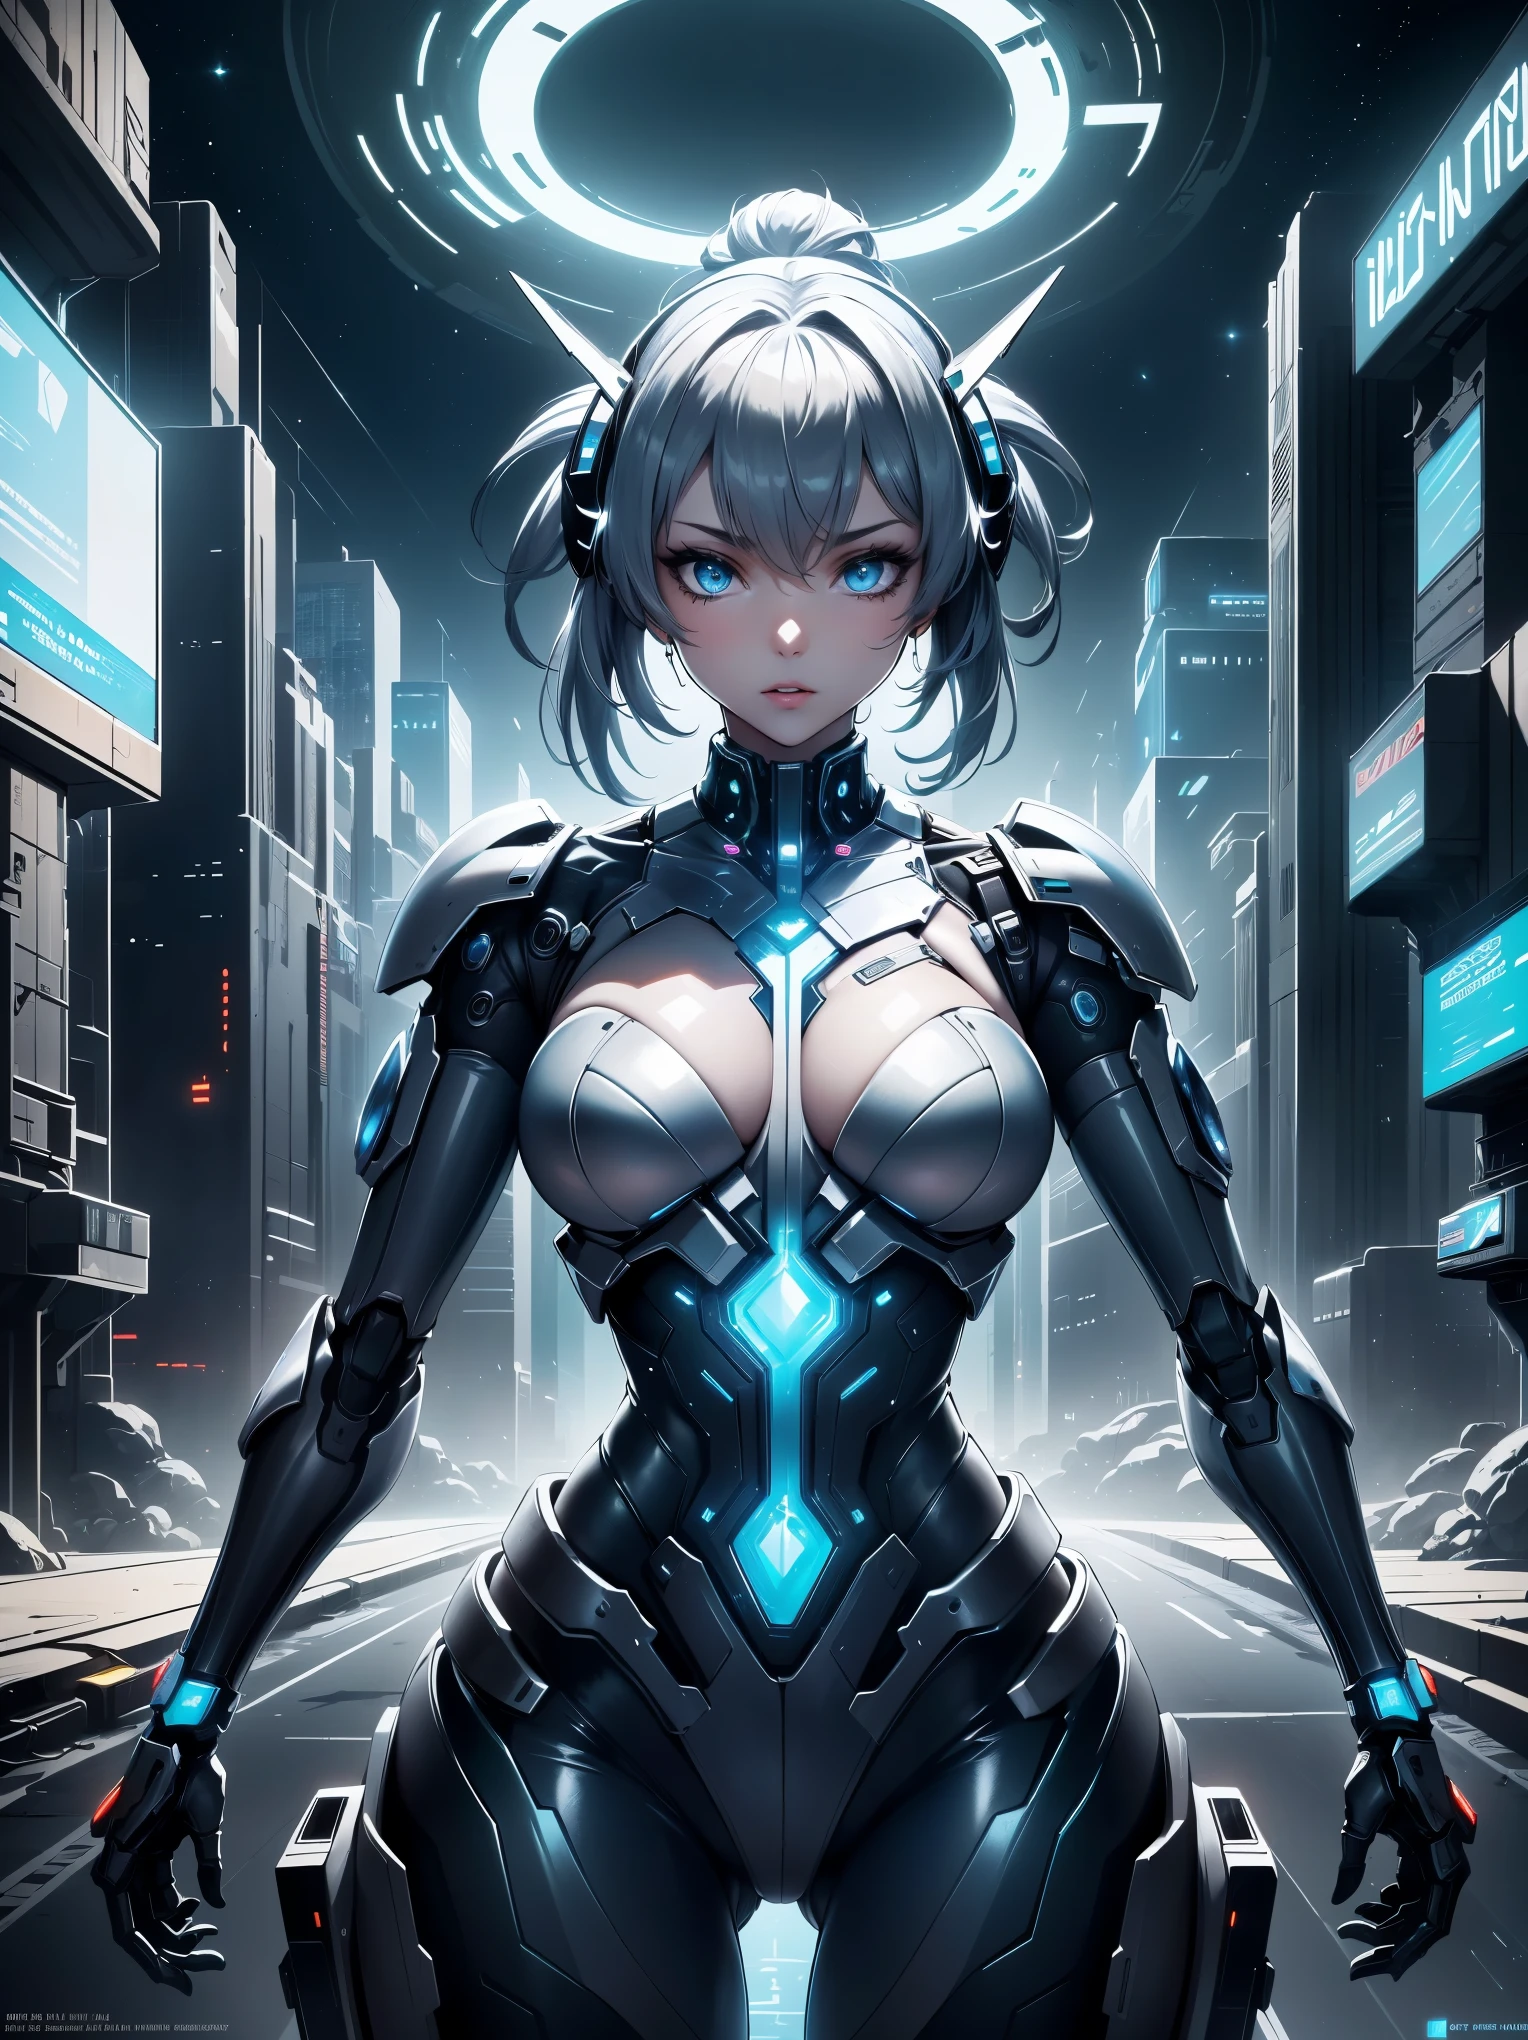 (8k), (Best Quality), (Masterpiece: 1.2), ((ultra realistic)), Futuristic mecha girl on neon-lit sci-fi cover, Style (Cyberpunk:1.3), Wear a mecha battle suit with shiny details, posing sensually, Big breasts and big tail (muslos hechizantes whole body) whole body, White details, , blue, (detailed futuristic),(in a battle, alien space)